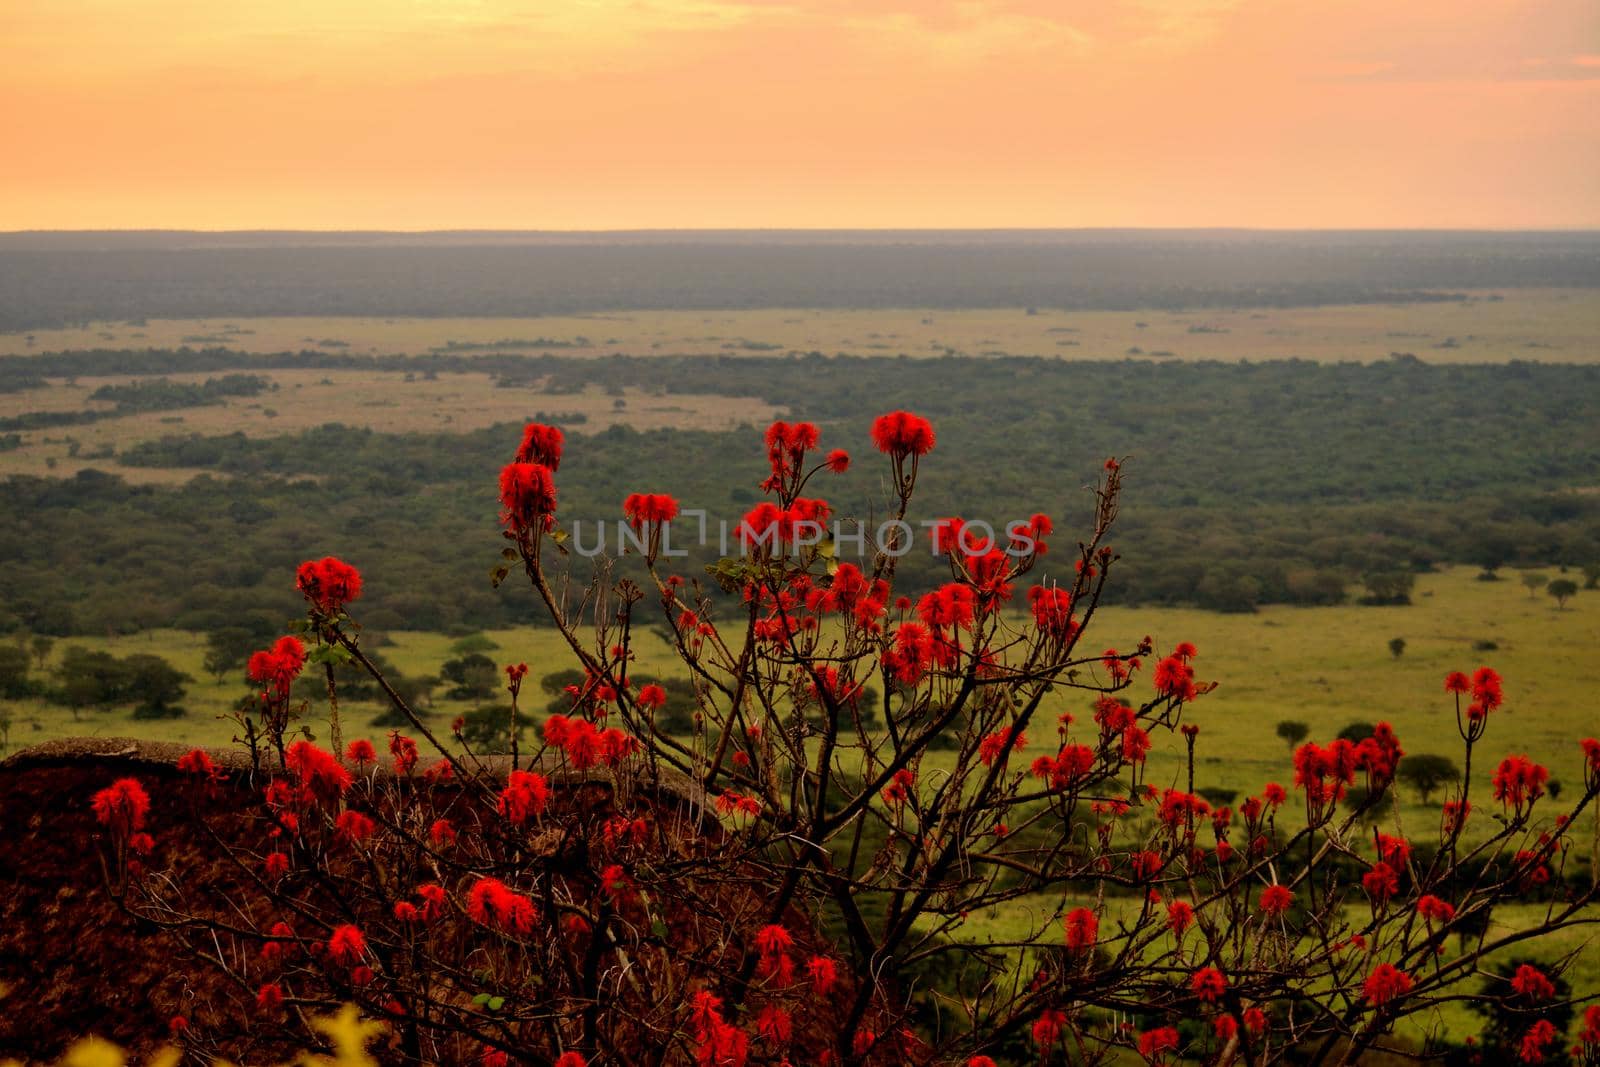 View of Queen Elizabeth National Park and the wonderful savanna by silentstock639